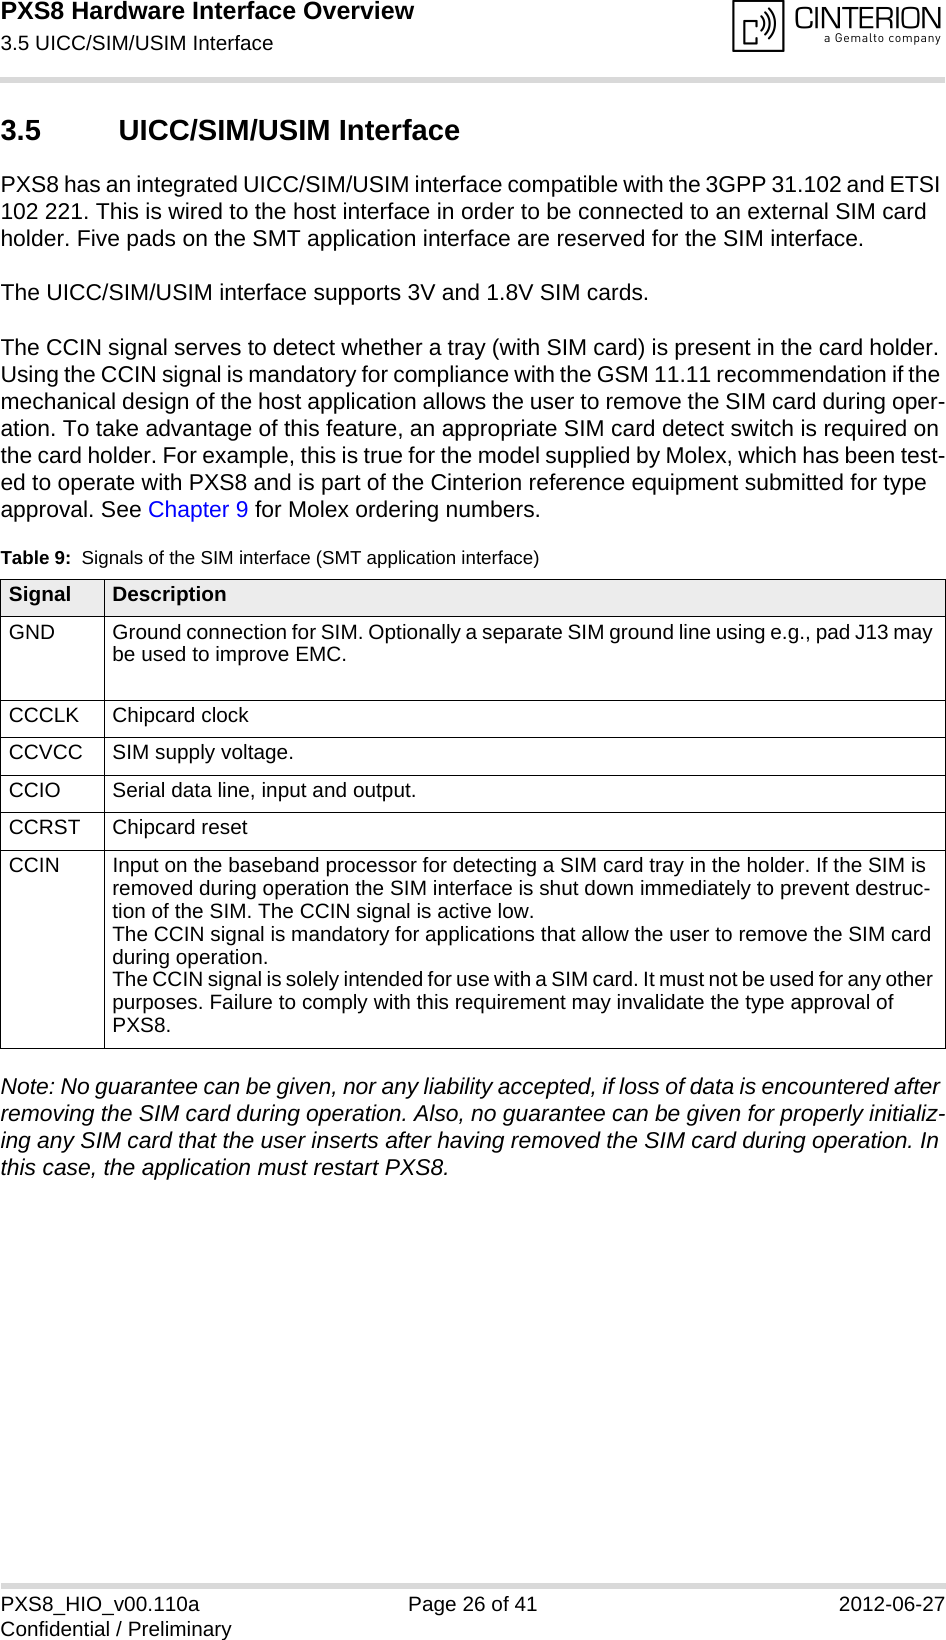 PXS8 Hardware Interface Overview3.5 UICC/SIM/USIM Interface29PXS8_HIO_v00.110a Page 26 of 41 2012-06-27Confidential / Preliminary3.5 UICC/SIM/USIM InterfacePXS8 has an integrated UICC/SIM/USIM interface compatible with the 3GPP 31.102 and ETSI 102 221. This is wired to the host interface in order to be connected to an external SIM card holder. Five pads on the SMT application interface are reserved for the SIM interface. The UICC/SIM/USIM interface supports 3V and 1.8V SIM cards. The CCIN signal serves to detect whether a tray (with SIM card) is present in the card holder. Using the CCIN signal is mandatory for compliance with the GSM 11.11 recommendation if the mechanical design of the host application allows the user to remove the SIM card during oper-ation. To take advantage of this feature, an appropriate SIM card detect switch is required on the card holder. For example, this is true for the model supplied by Molex, which has been test-ed to operate with PXS8 and is part of the Cinterion reference equipment submitted for type approval. See Chapter 9 for Molex ordering numbers.Note: No guarantee can be given, nor any liability accepted, if loss of data is encountered after removing the SIM card during operation. Also, no guarantee can be given for properly initializ-ing any SIM card that the user inserts after having removed the SIM card during operation. In this case, the application must restart PXS8.Table 9:  Signals of the SIM interface (SMT application interface)Signal DescriptionGND Ground connection for SIM. Optionally a separate SIM ground line using e.g., pad J13 may be used to improve EMC.CCCLK Chipcard clockCCVCC SIM supply voltage.CCIO Serial data line, input and output.CCRST Chipcard resetCCIN Input on the baseband processor for detecting a SIM card tray in the holder. If the SIM is removed during operation the SIM interface is shut down immediately to prevent destruc-tion of the SIM. The CCIN signal is active low.The CCIN signal is mandatory for applications that allow the user to remove the SIM card during operation. The CCIN signal is solely intended for use with a SIM card. It must not be used for any other purposes. Failure to comply with this requirement may invalidate the type approval of PXS8.